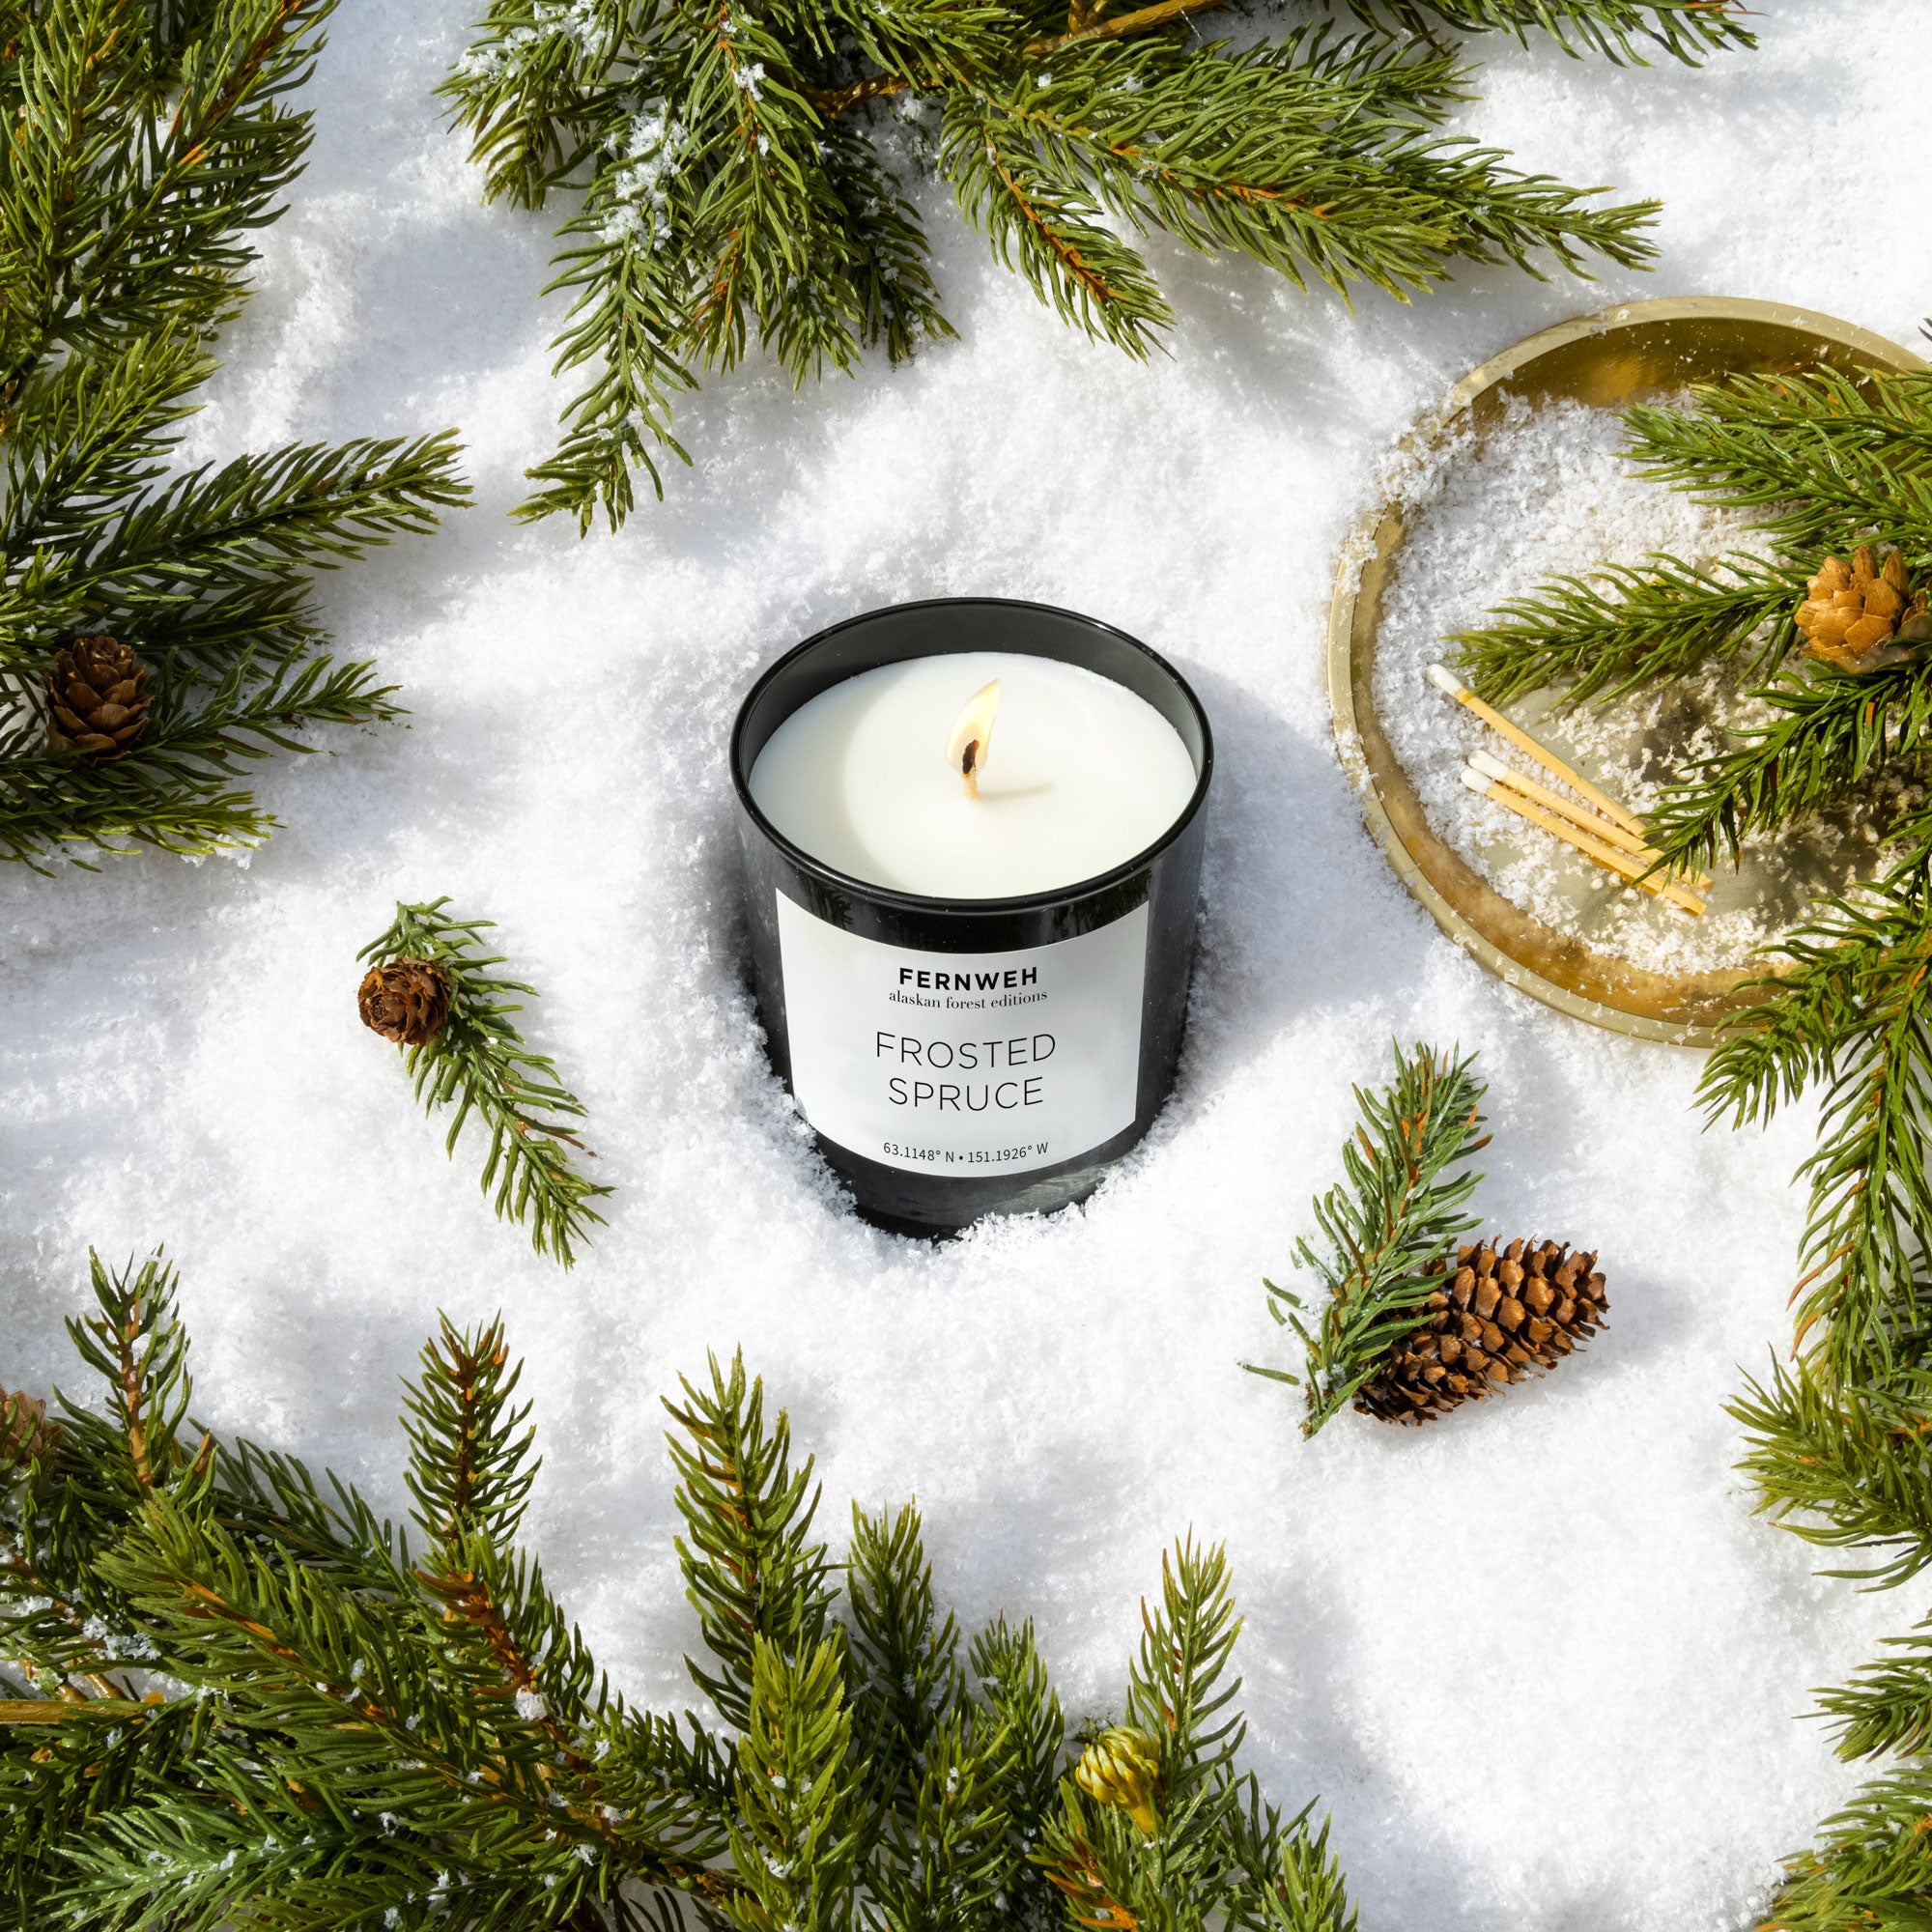 Winter Evergreen Christmas Scented Soy Candle Fragrance, Holiday Candle  Fragrance 